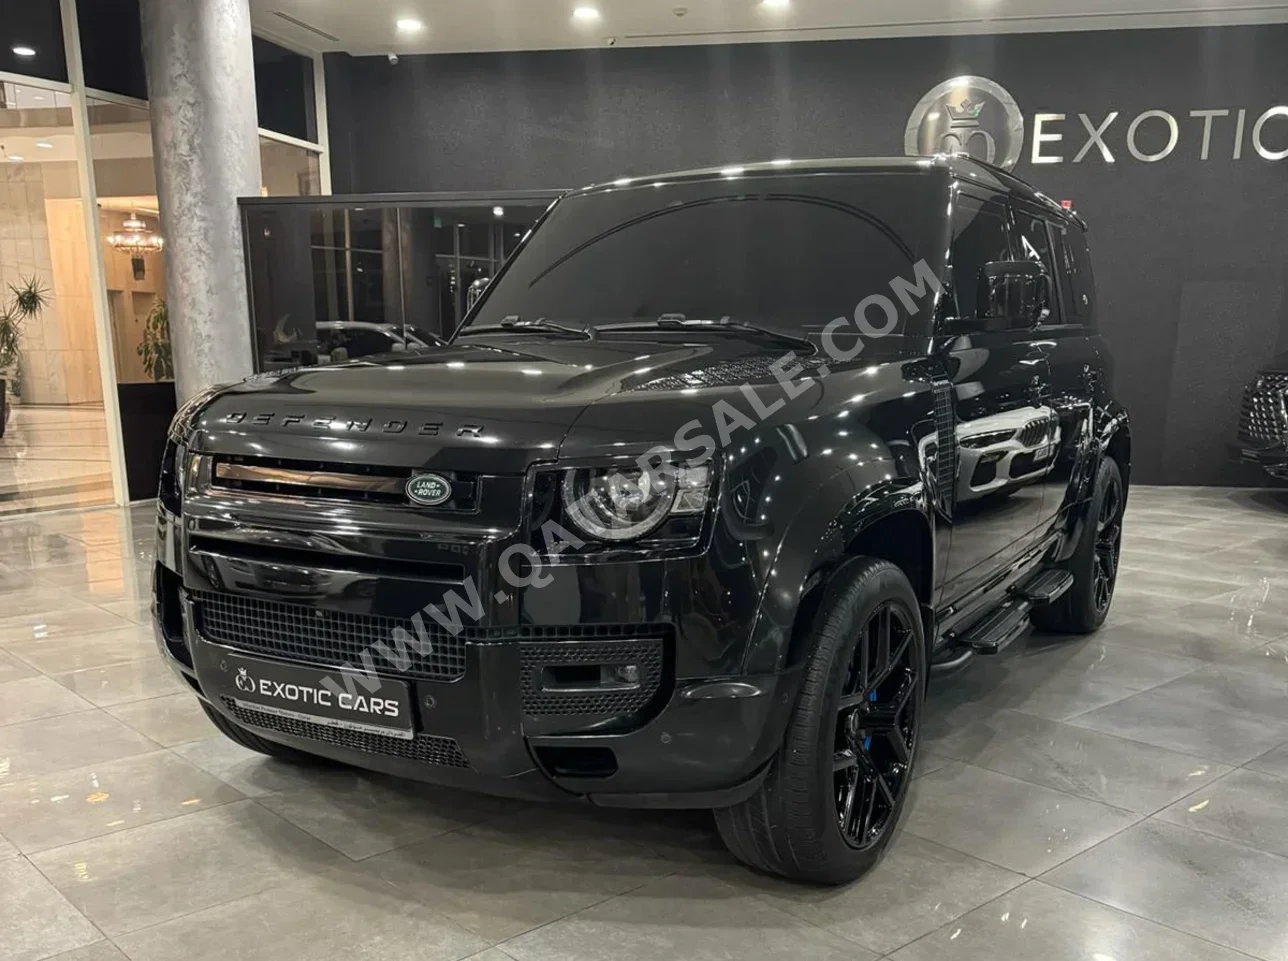 Land Rover  Defender  110 HSE  2022  Automatic  46,000 Km  6 Cylinder  Four Wheel Drive (4WD)  SUV  Black  With Warranty